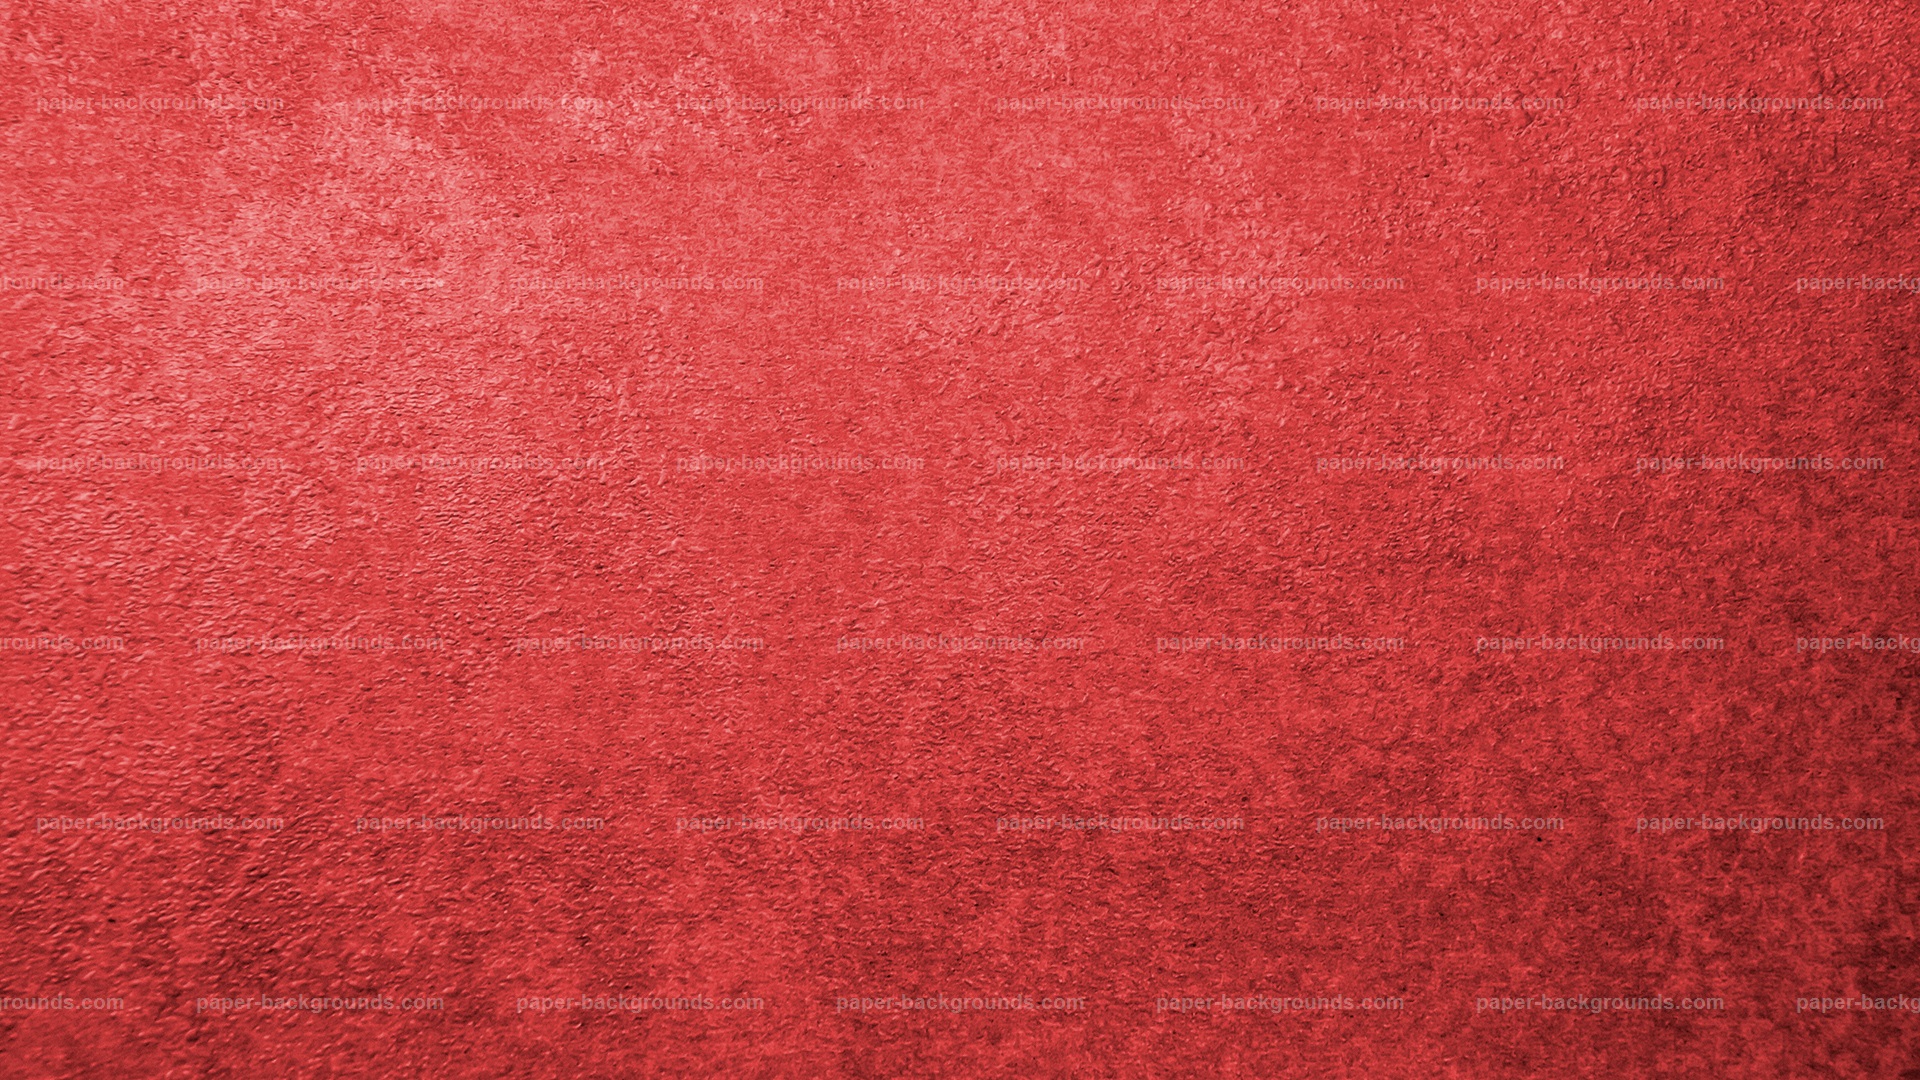 Red Wall Texture Vintage Background HD Paper Background